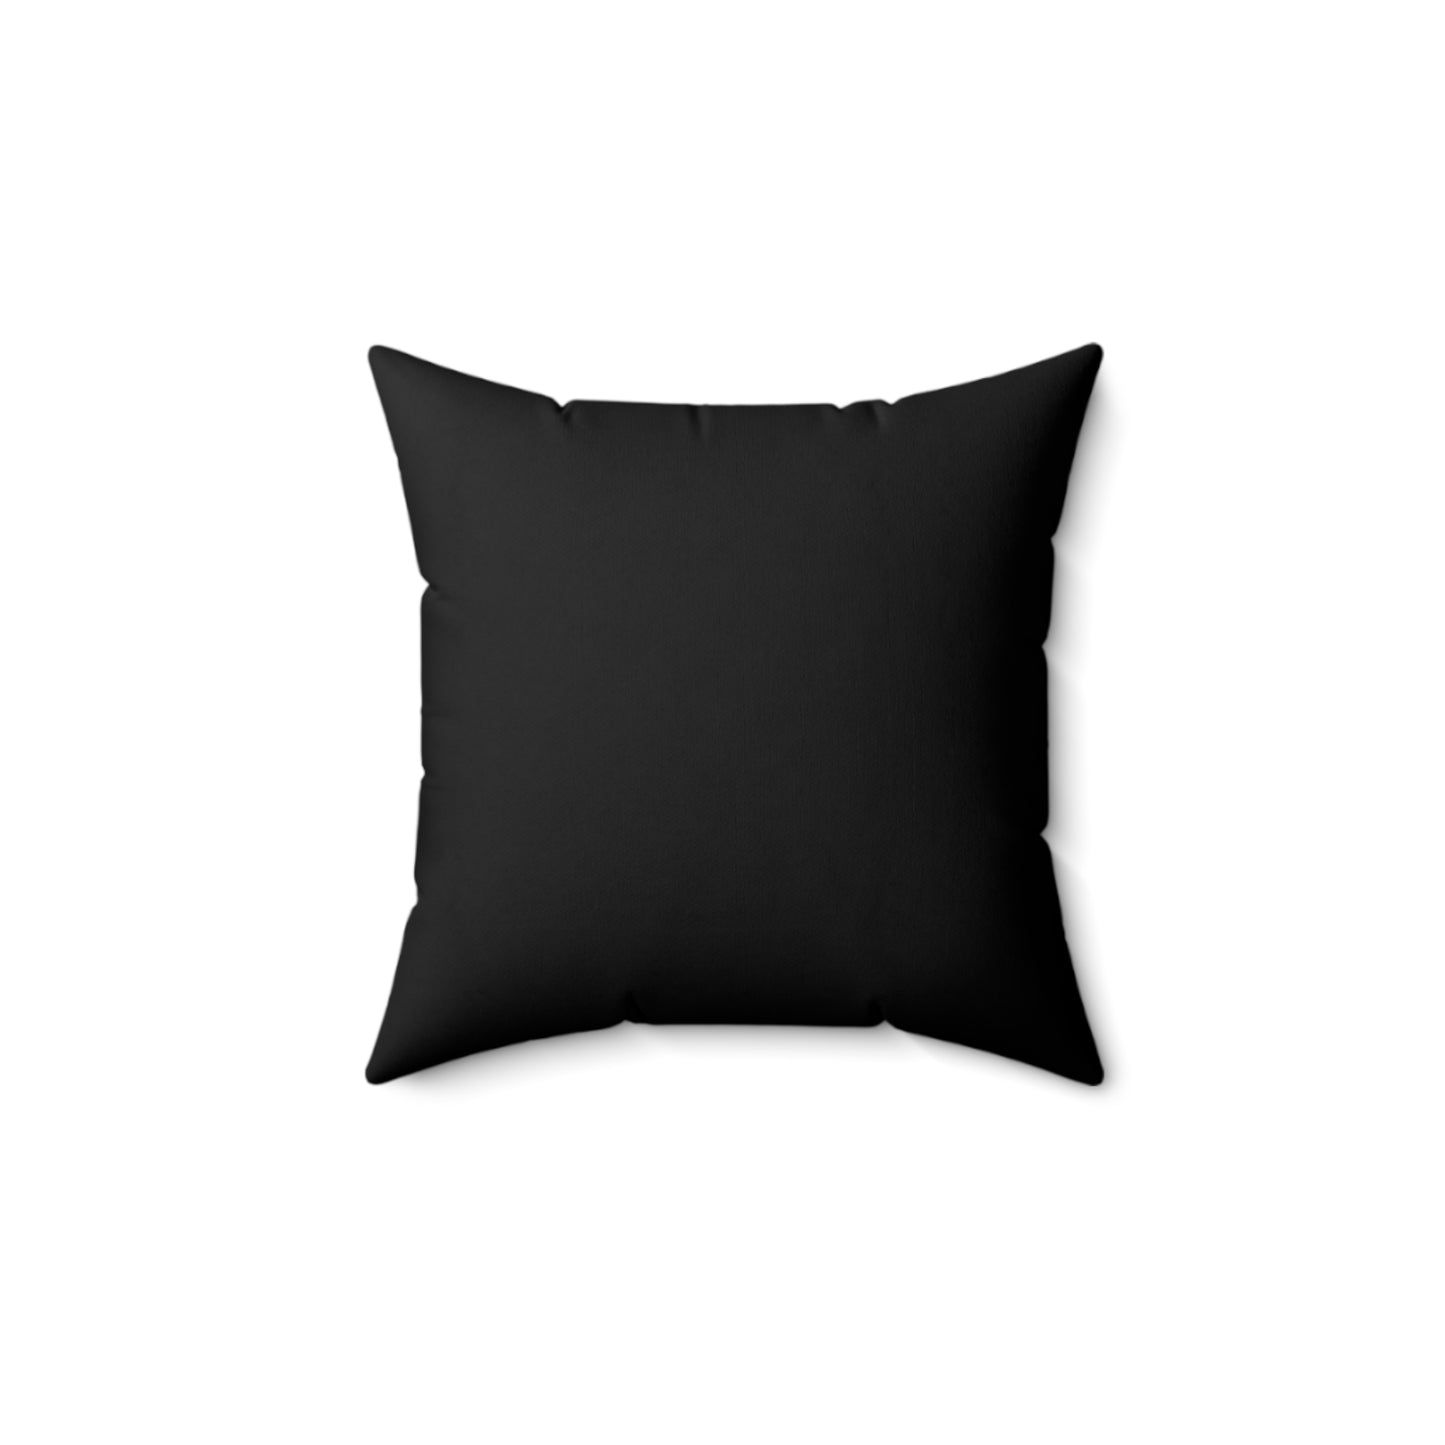 VHS Collection Throw Pillow